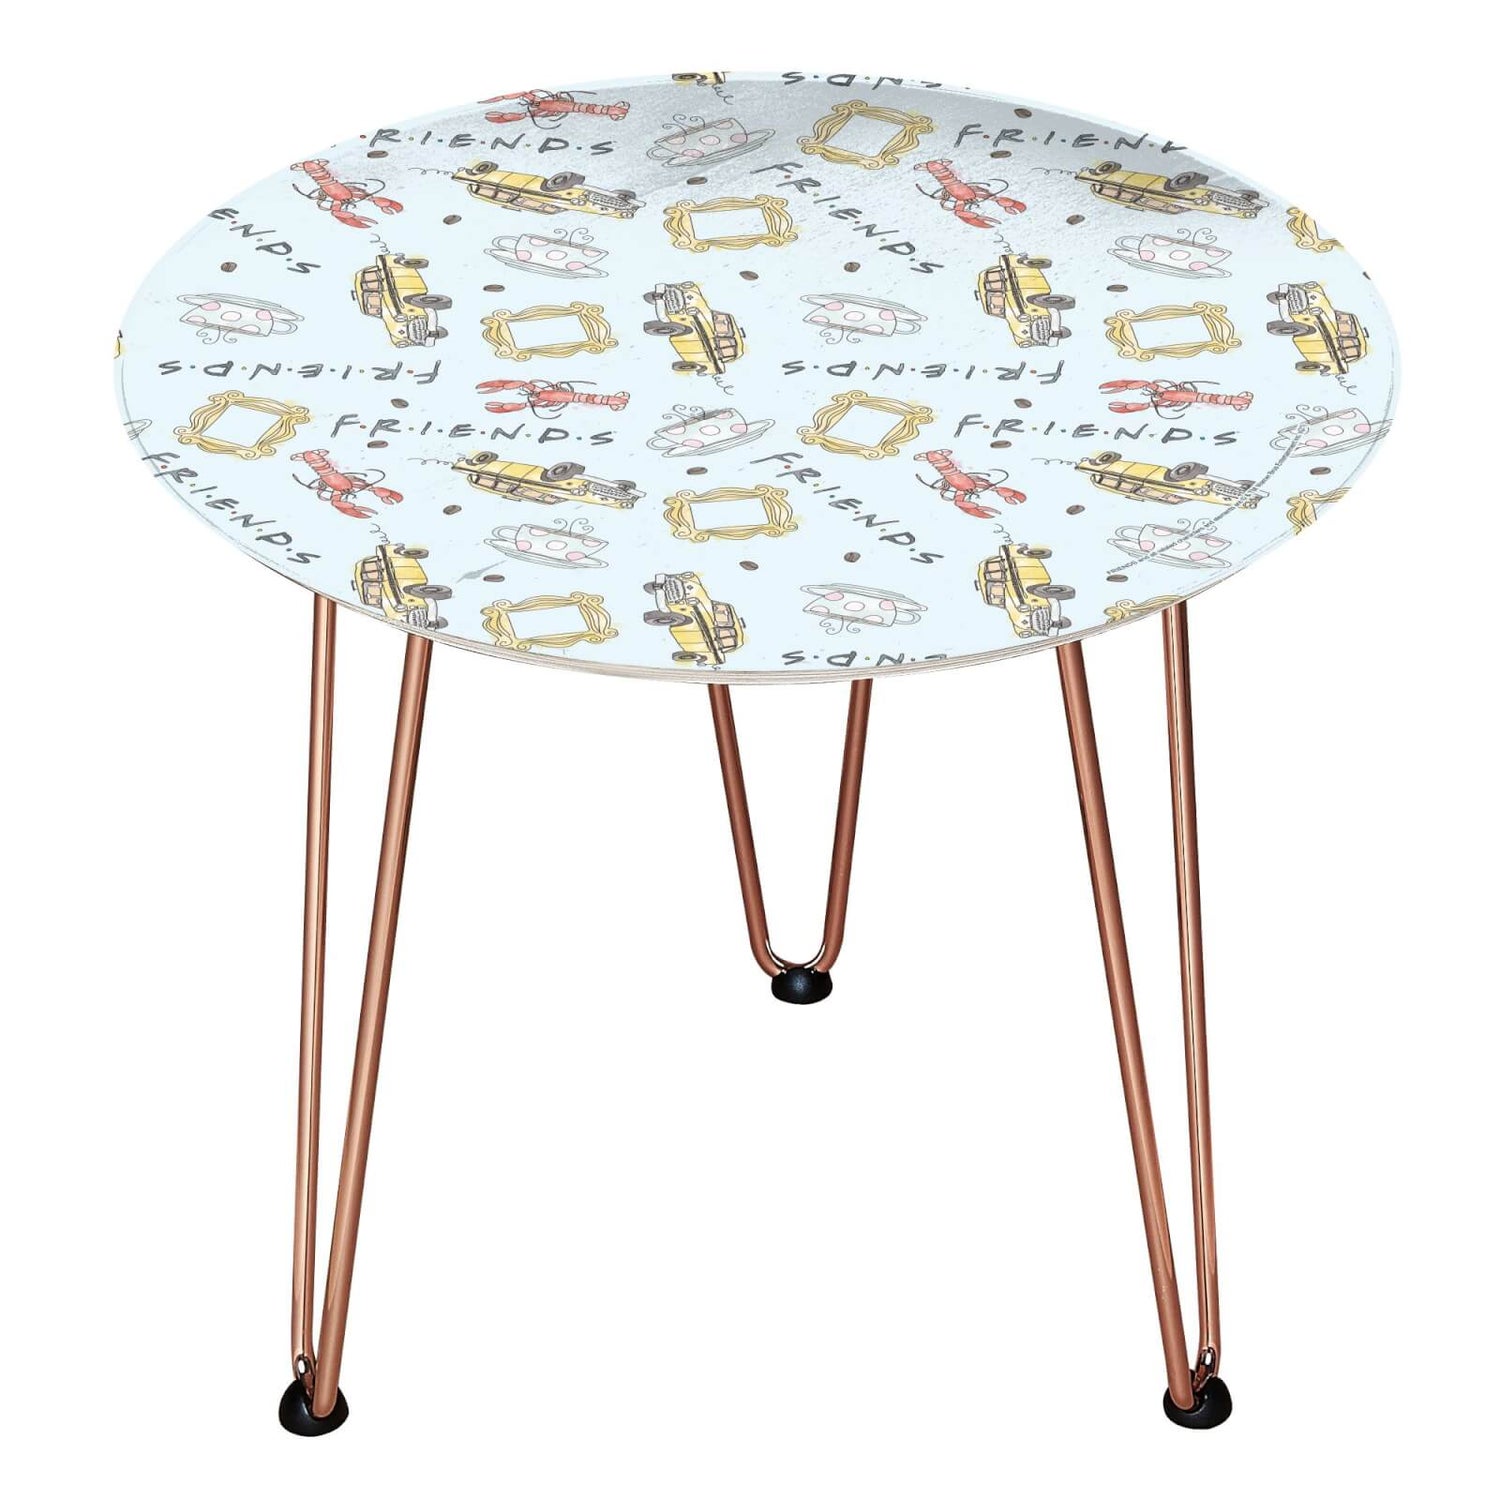 Decorsome x Friends Wooden Side Table - Rose gold